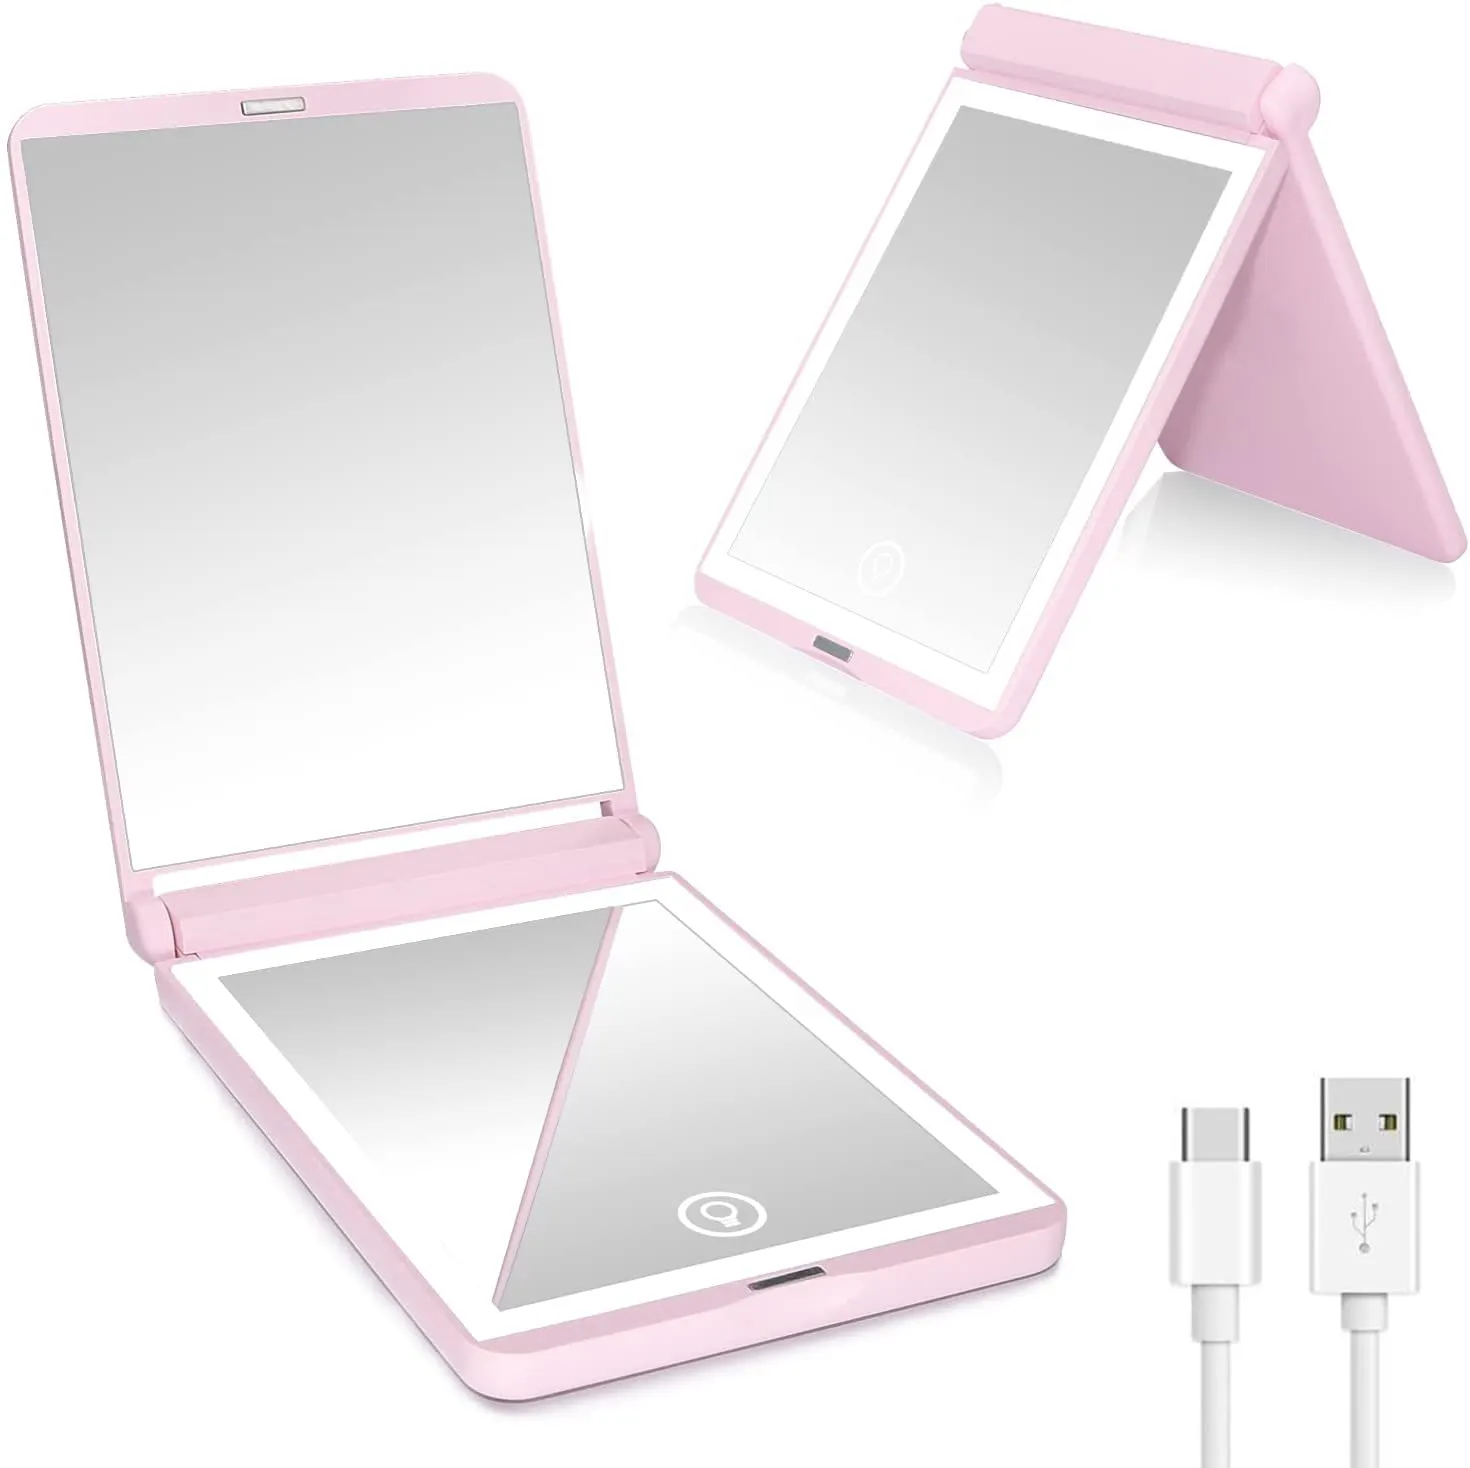 Rechargeable LED Travel Makeup Mirror with Lights Folding Portable Cosmetic Handheld Mirror for Girls Gift